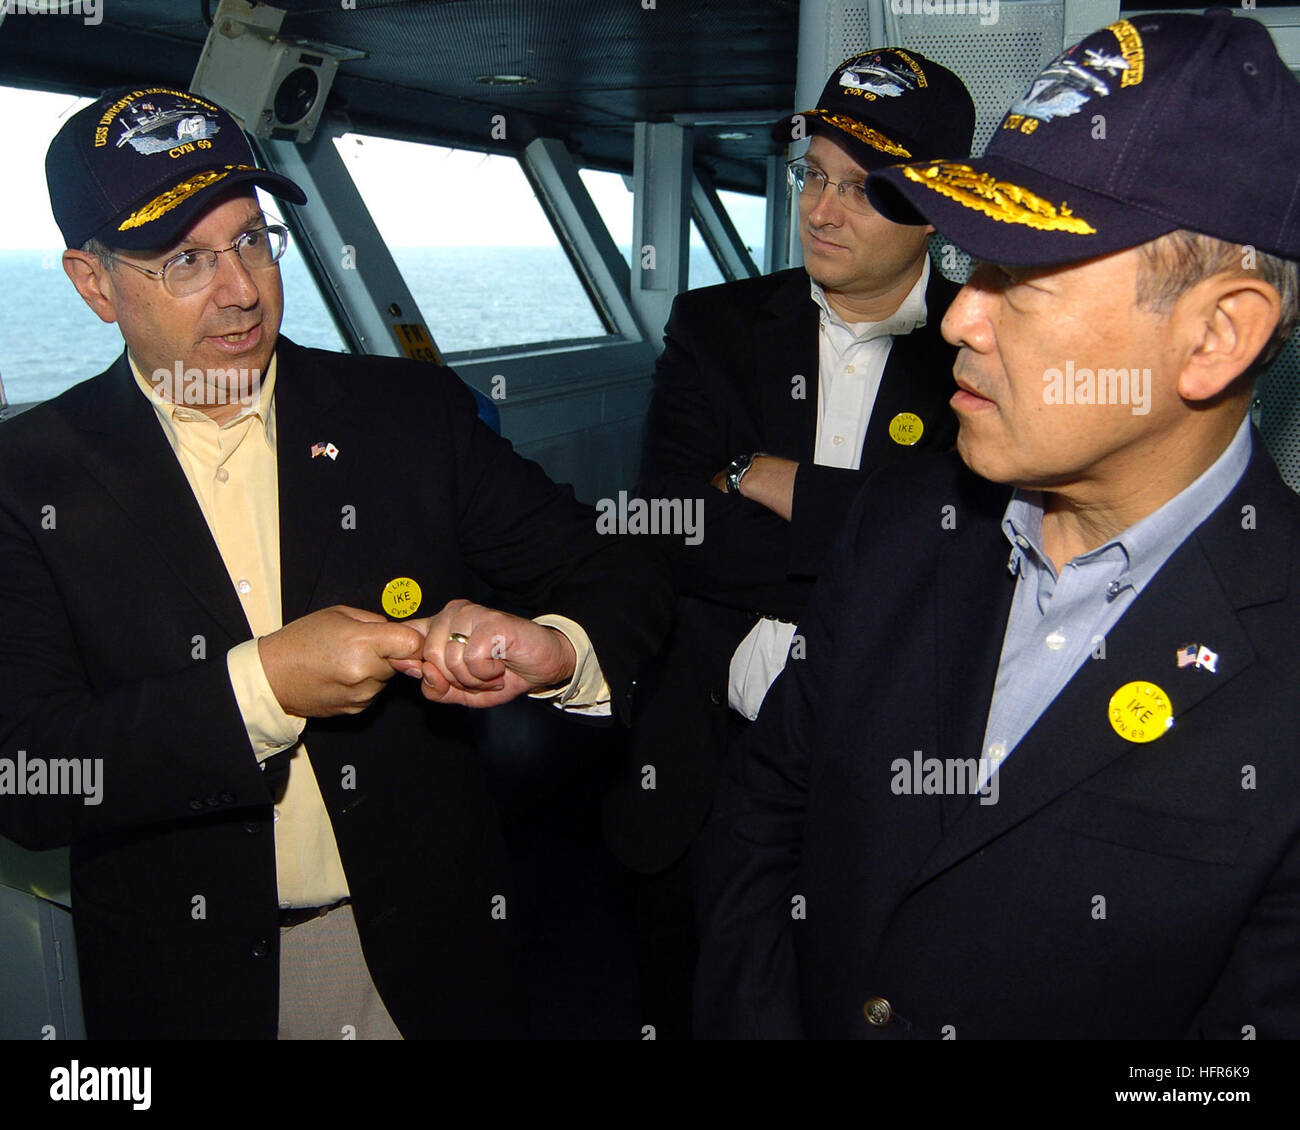 080917-N-6604E-001 Atlantic Ocean (Sept. 17, 2008) The Secretary of the Navy, Dr. Donald C. Winter (left), discusses catapult operations with Japanese Ambassador to the United States, Ichiro Fujisaki (right), on IKE's Navigation Bridge yesterday. Secretary Winter, Ambassador Fujisaki and Deputy Under Secretary of the Navy Marshall Billingslea (center), visited USS Dwight D. Eisenhower (CVN 69), to observe the strike group at sea. (U.S. Navy Photo by Mass Communication Seaman Apprentice Bradley Evans/Released) US Navy 080917-N-6604E-001 ecretary of the Navy the Honorable Dr. Donald C. Winter, l Stock Photo